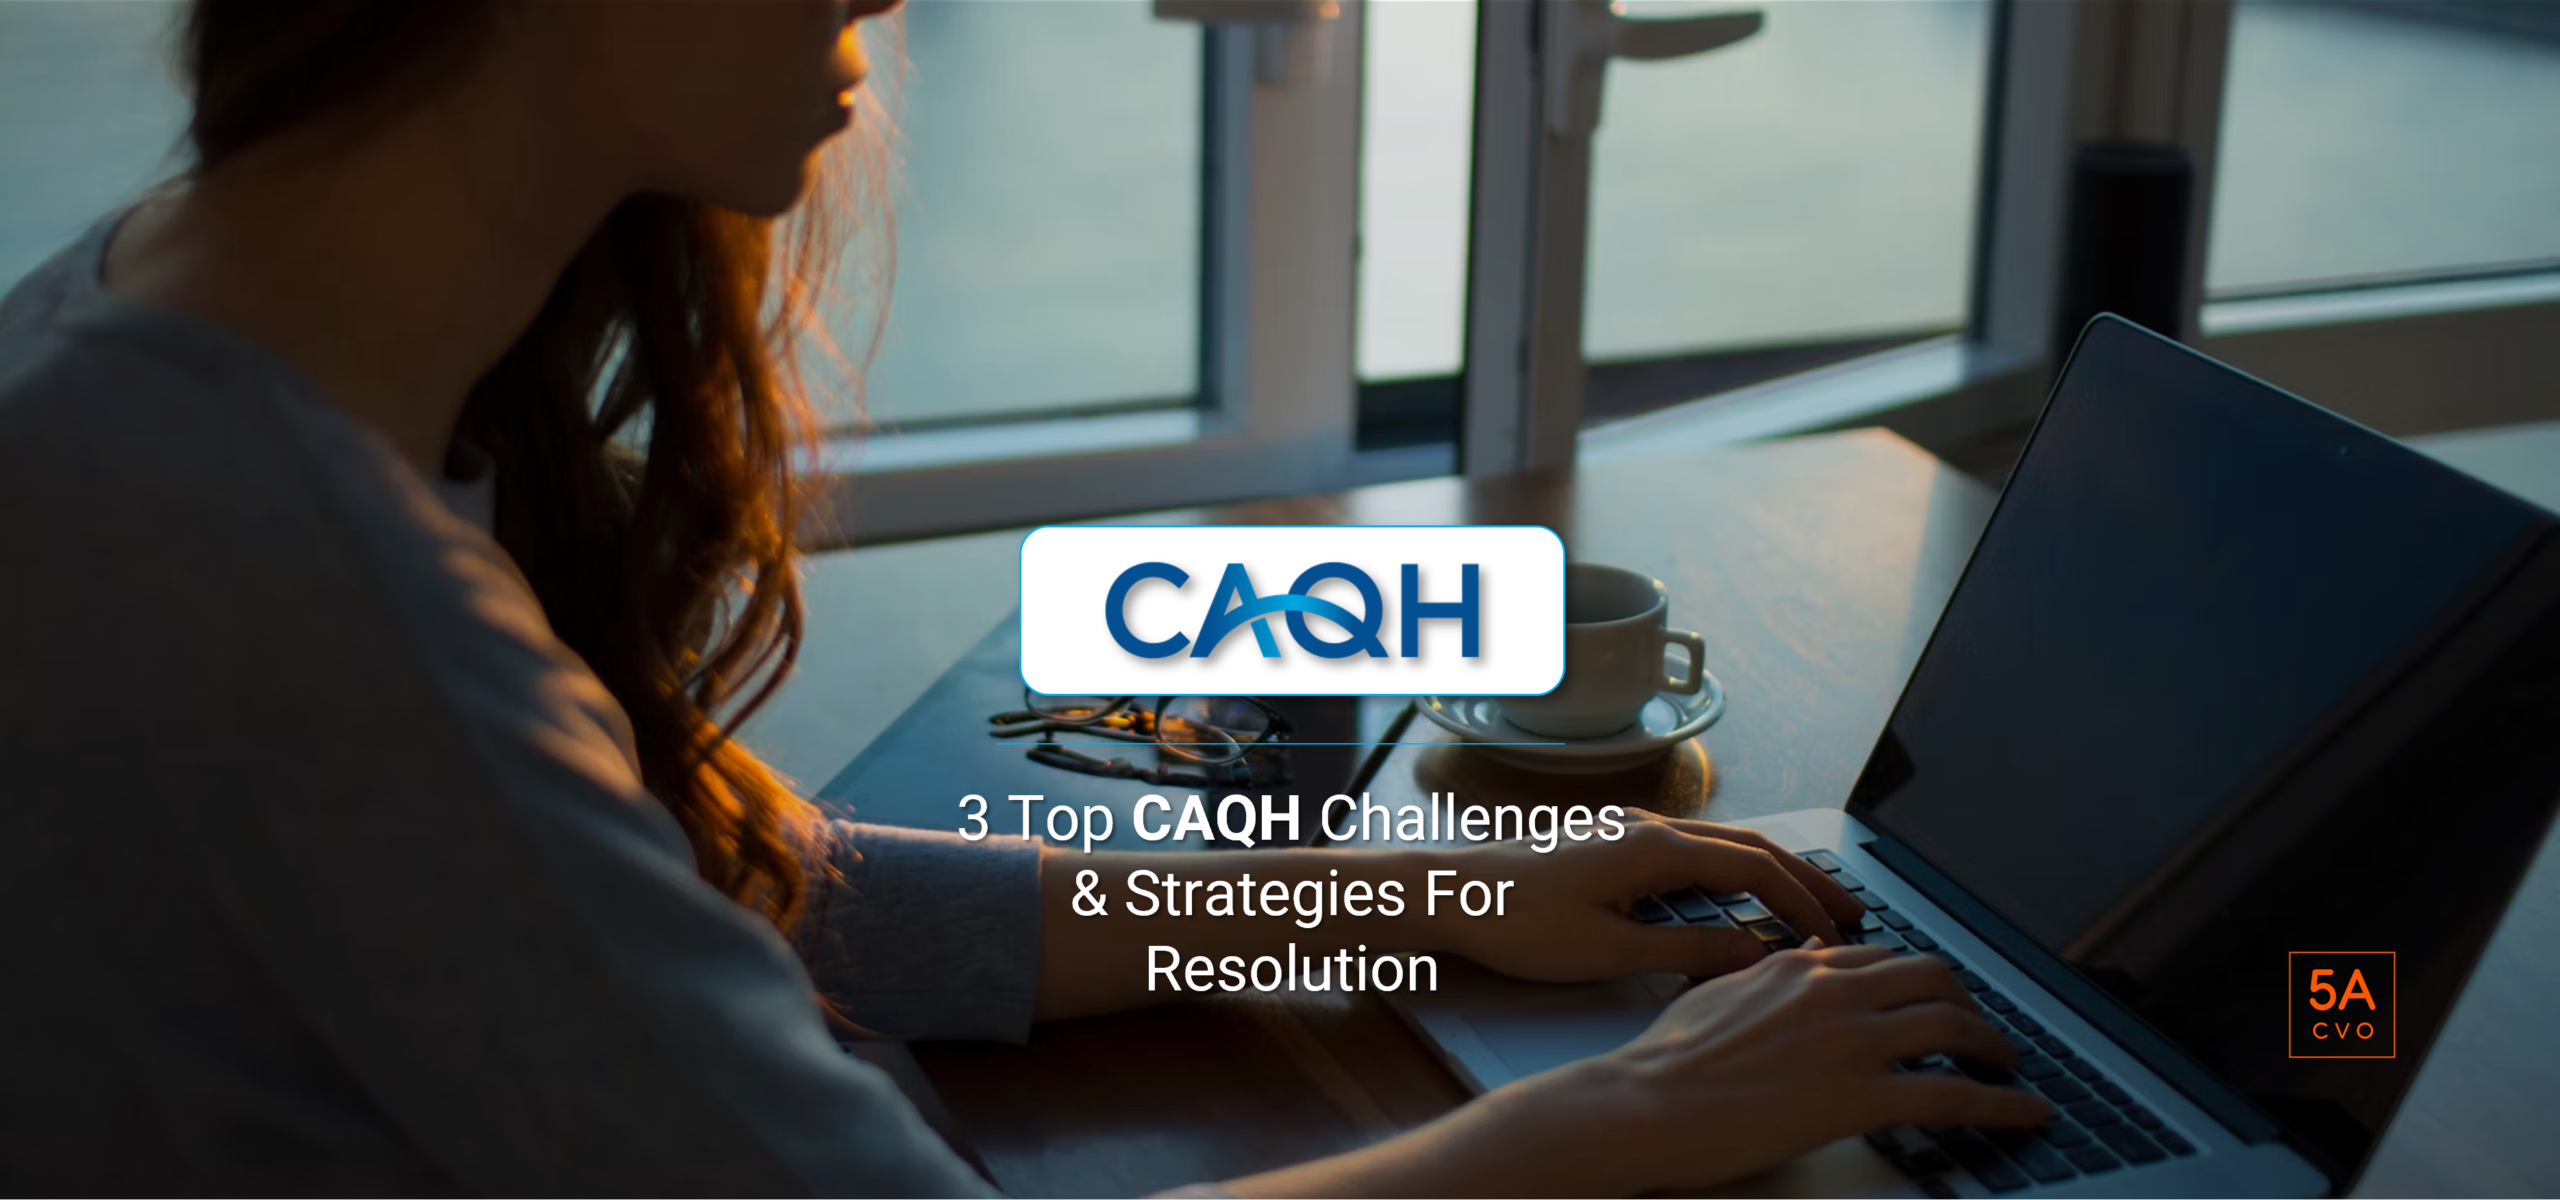 3 Top CAQH Challenges and Strategies For Resolution